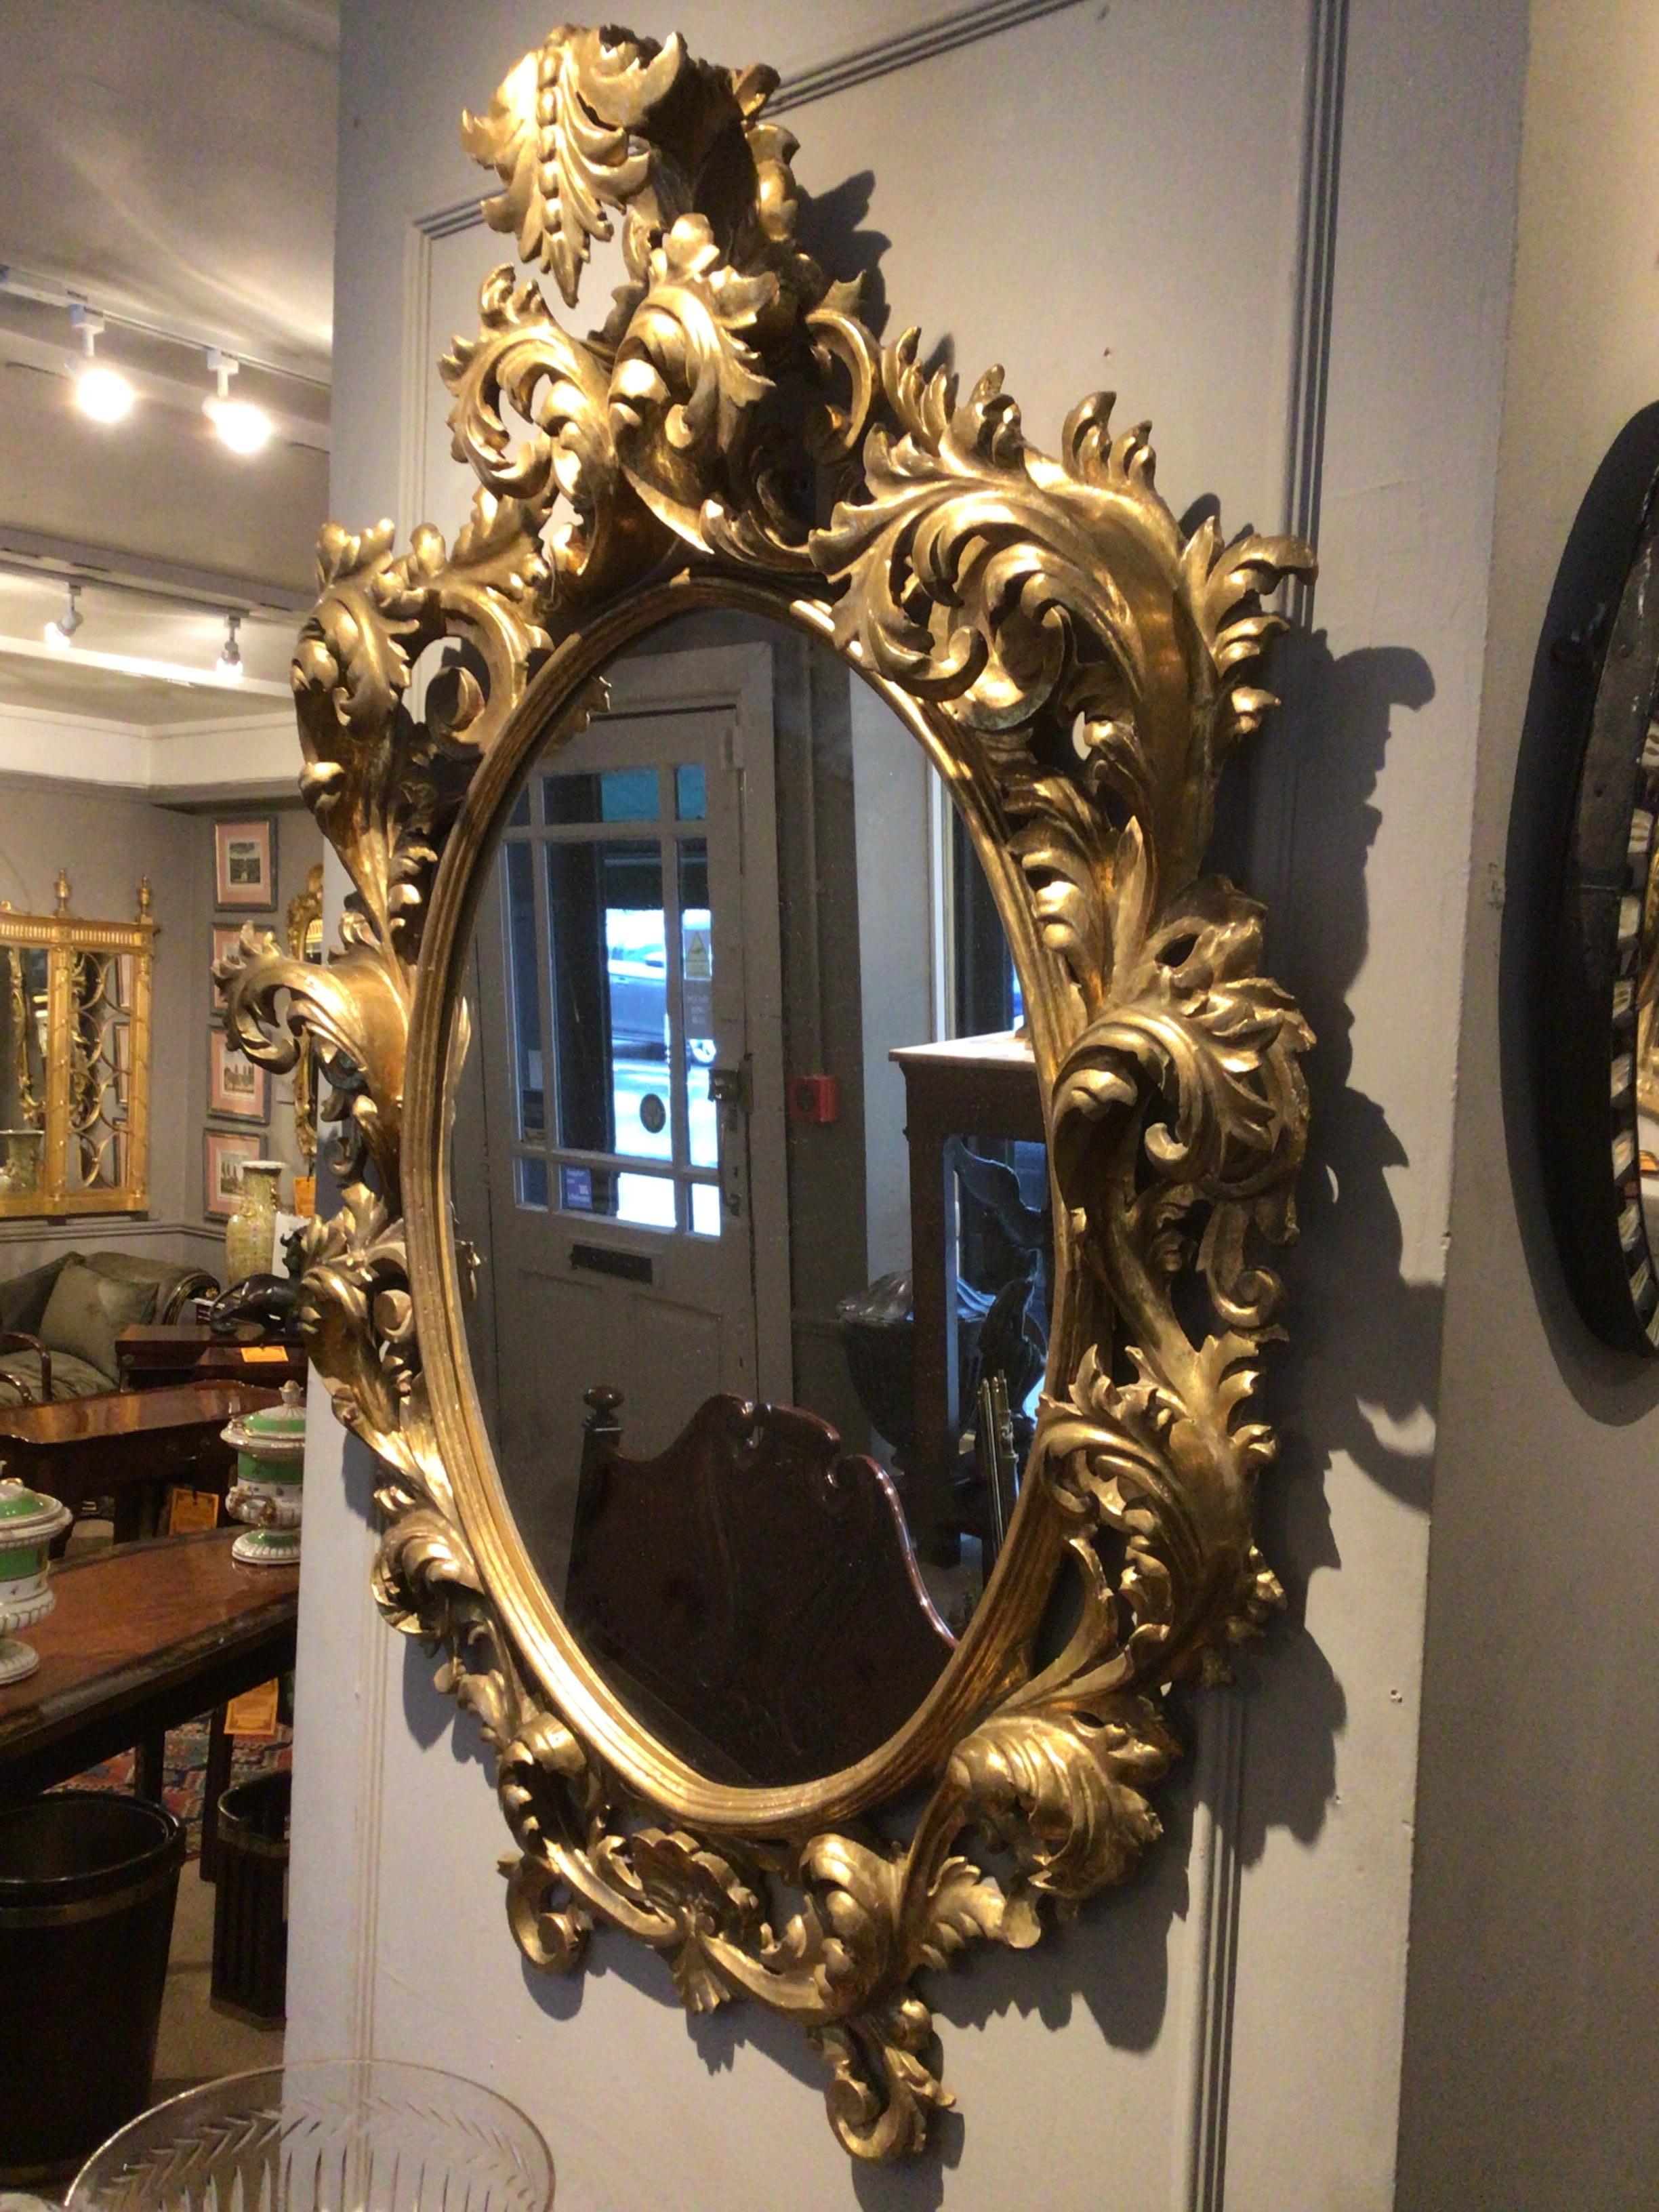 19th Century Gilt Rococo-style Wall Mirror In Excellent Condition For Sale In Dublin 8, IE